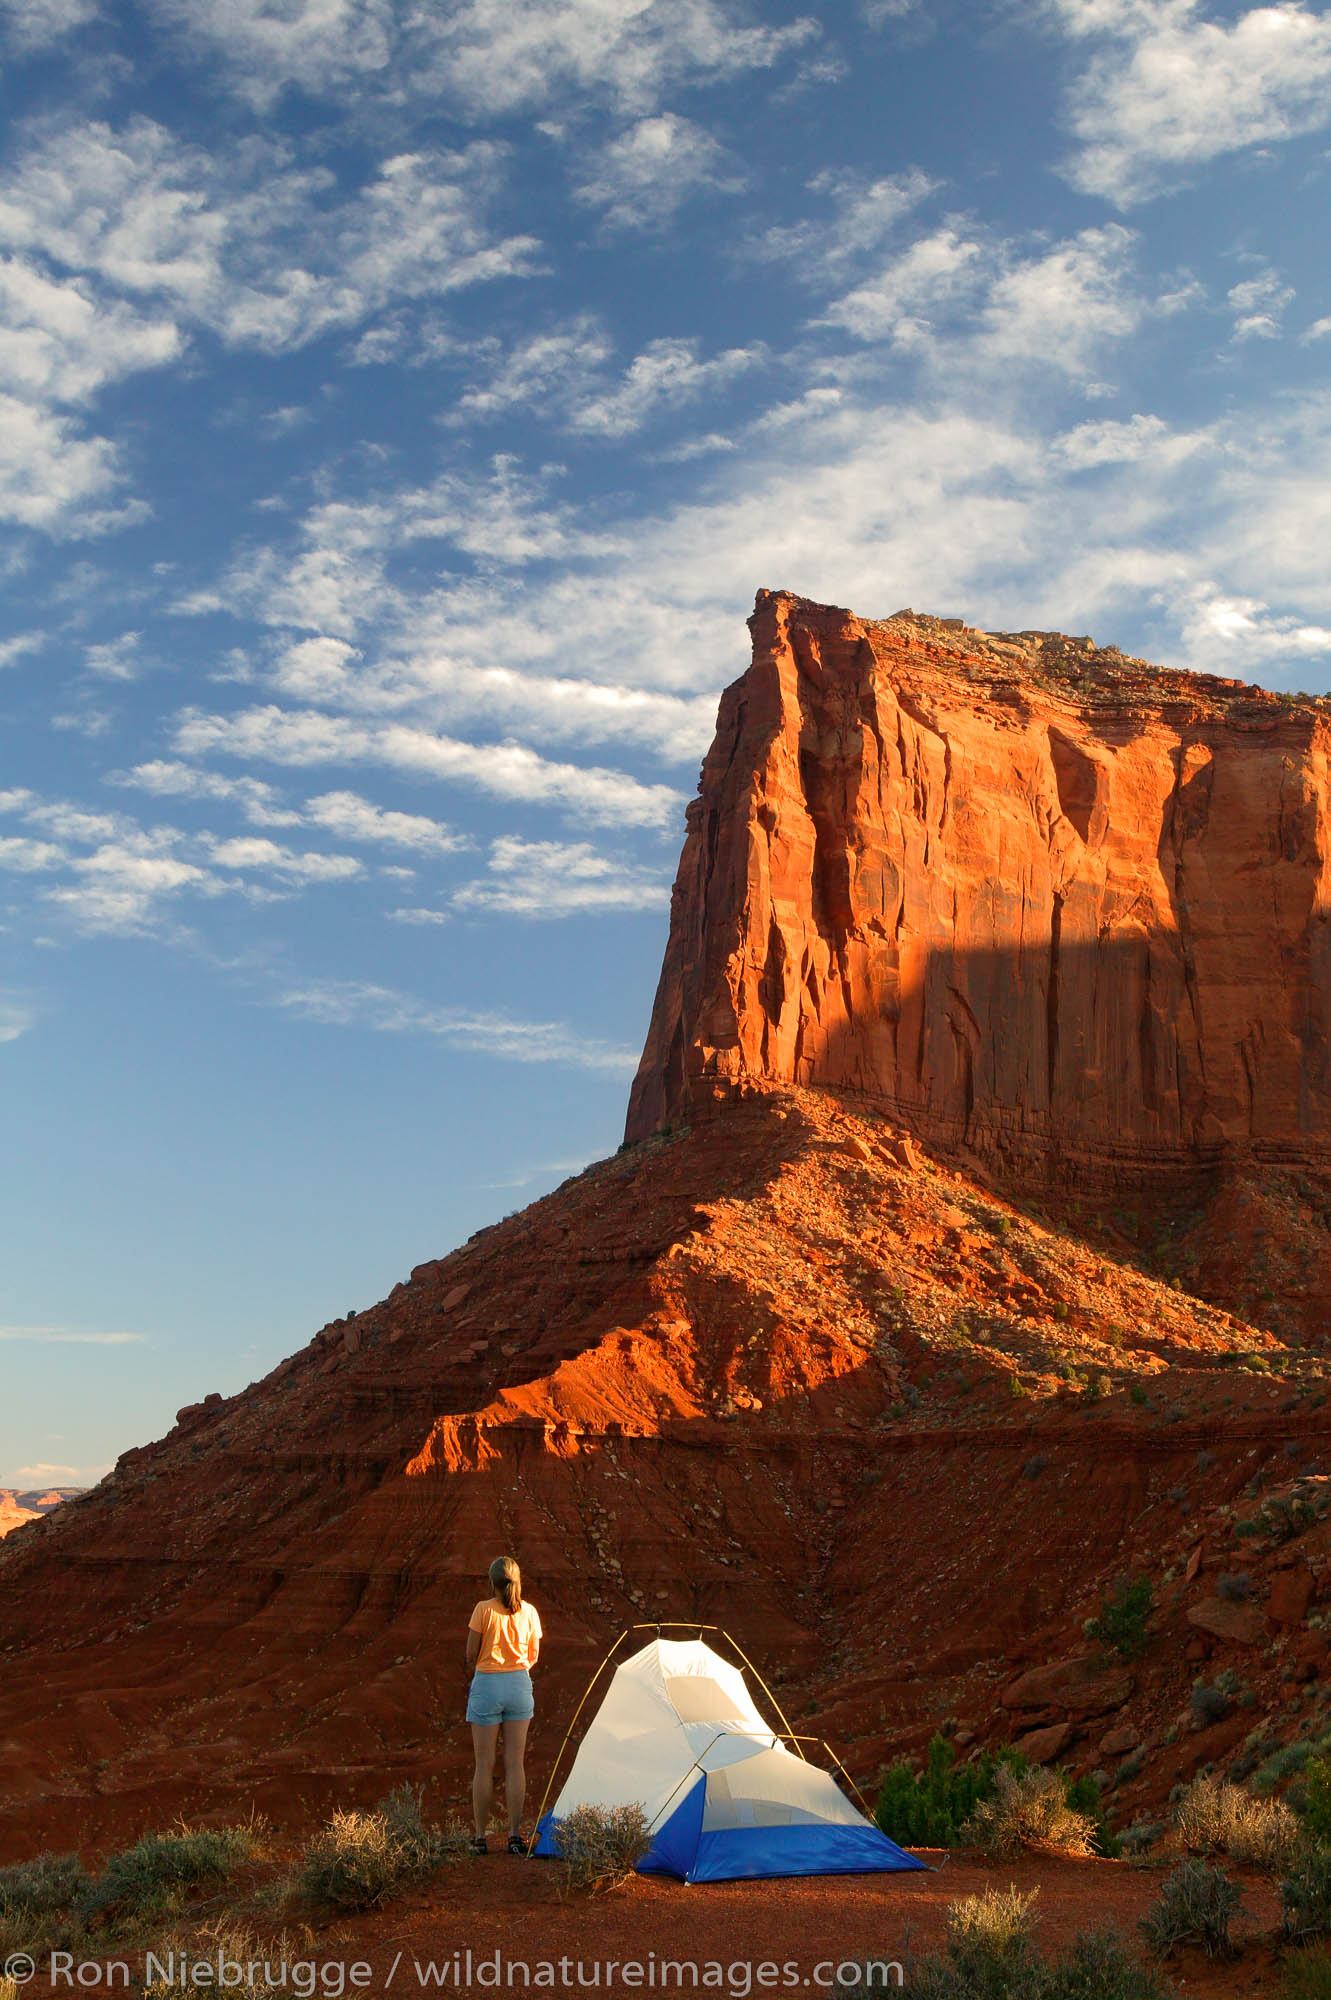 A visitor enjoys the view from camp of Monument Valley Navajo Tribal Park, Utah.  (model released)